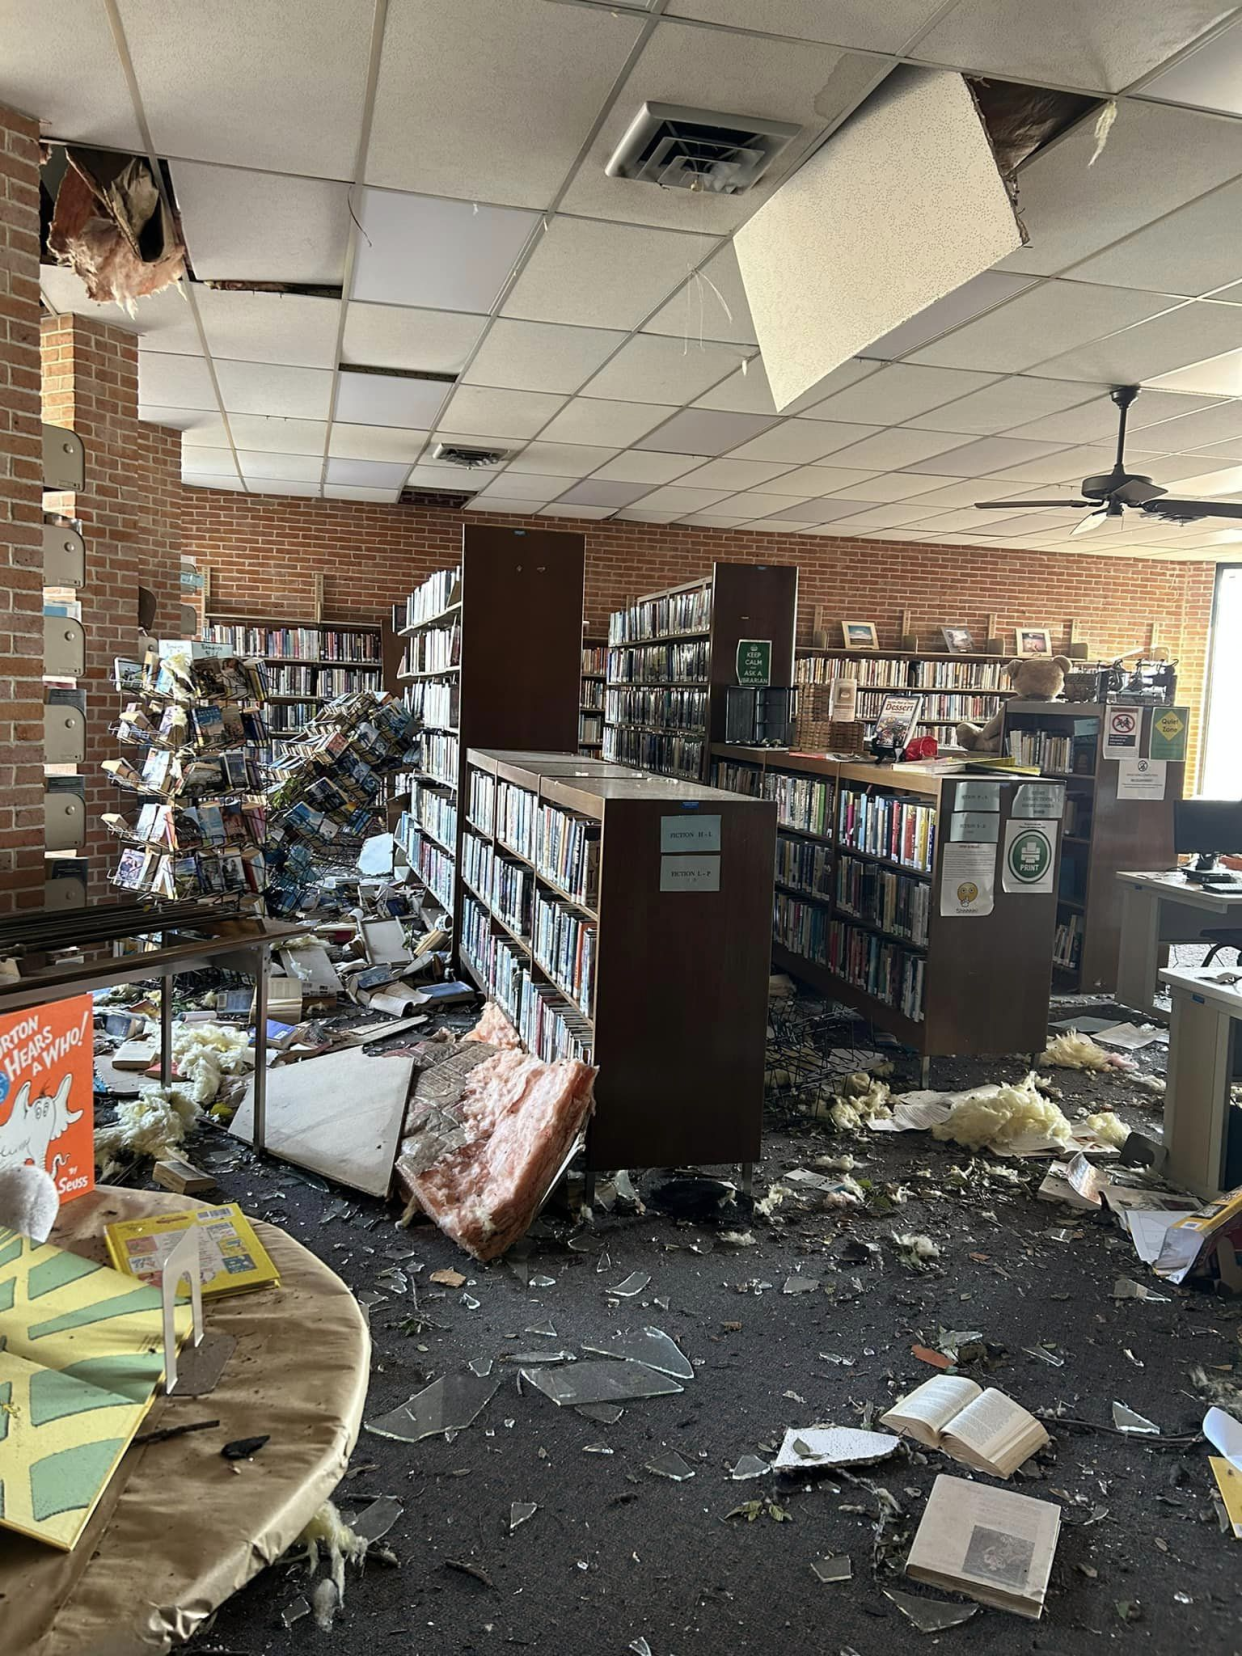 The Dover Public Library will hold a fundraiser June 28 for the Sharkey-Issaquena County Library in Rolling Fork, Mississippi. A tornado hit the library in March.